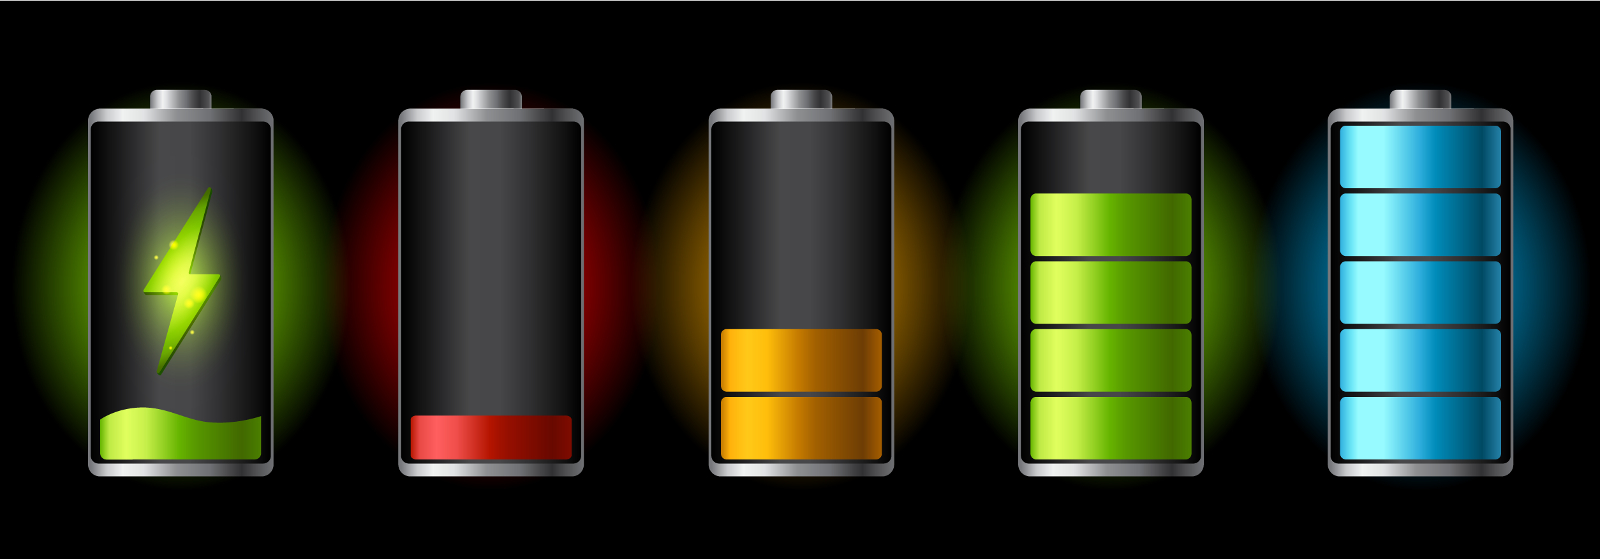 Image - Illustration of a charging battery. (Credit: MarySan/Shutterstock.com)